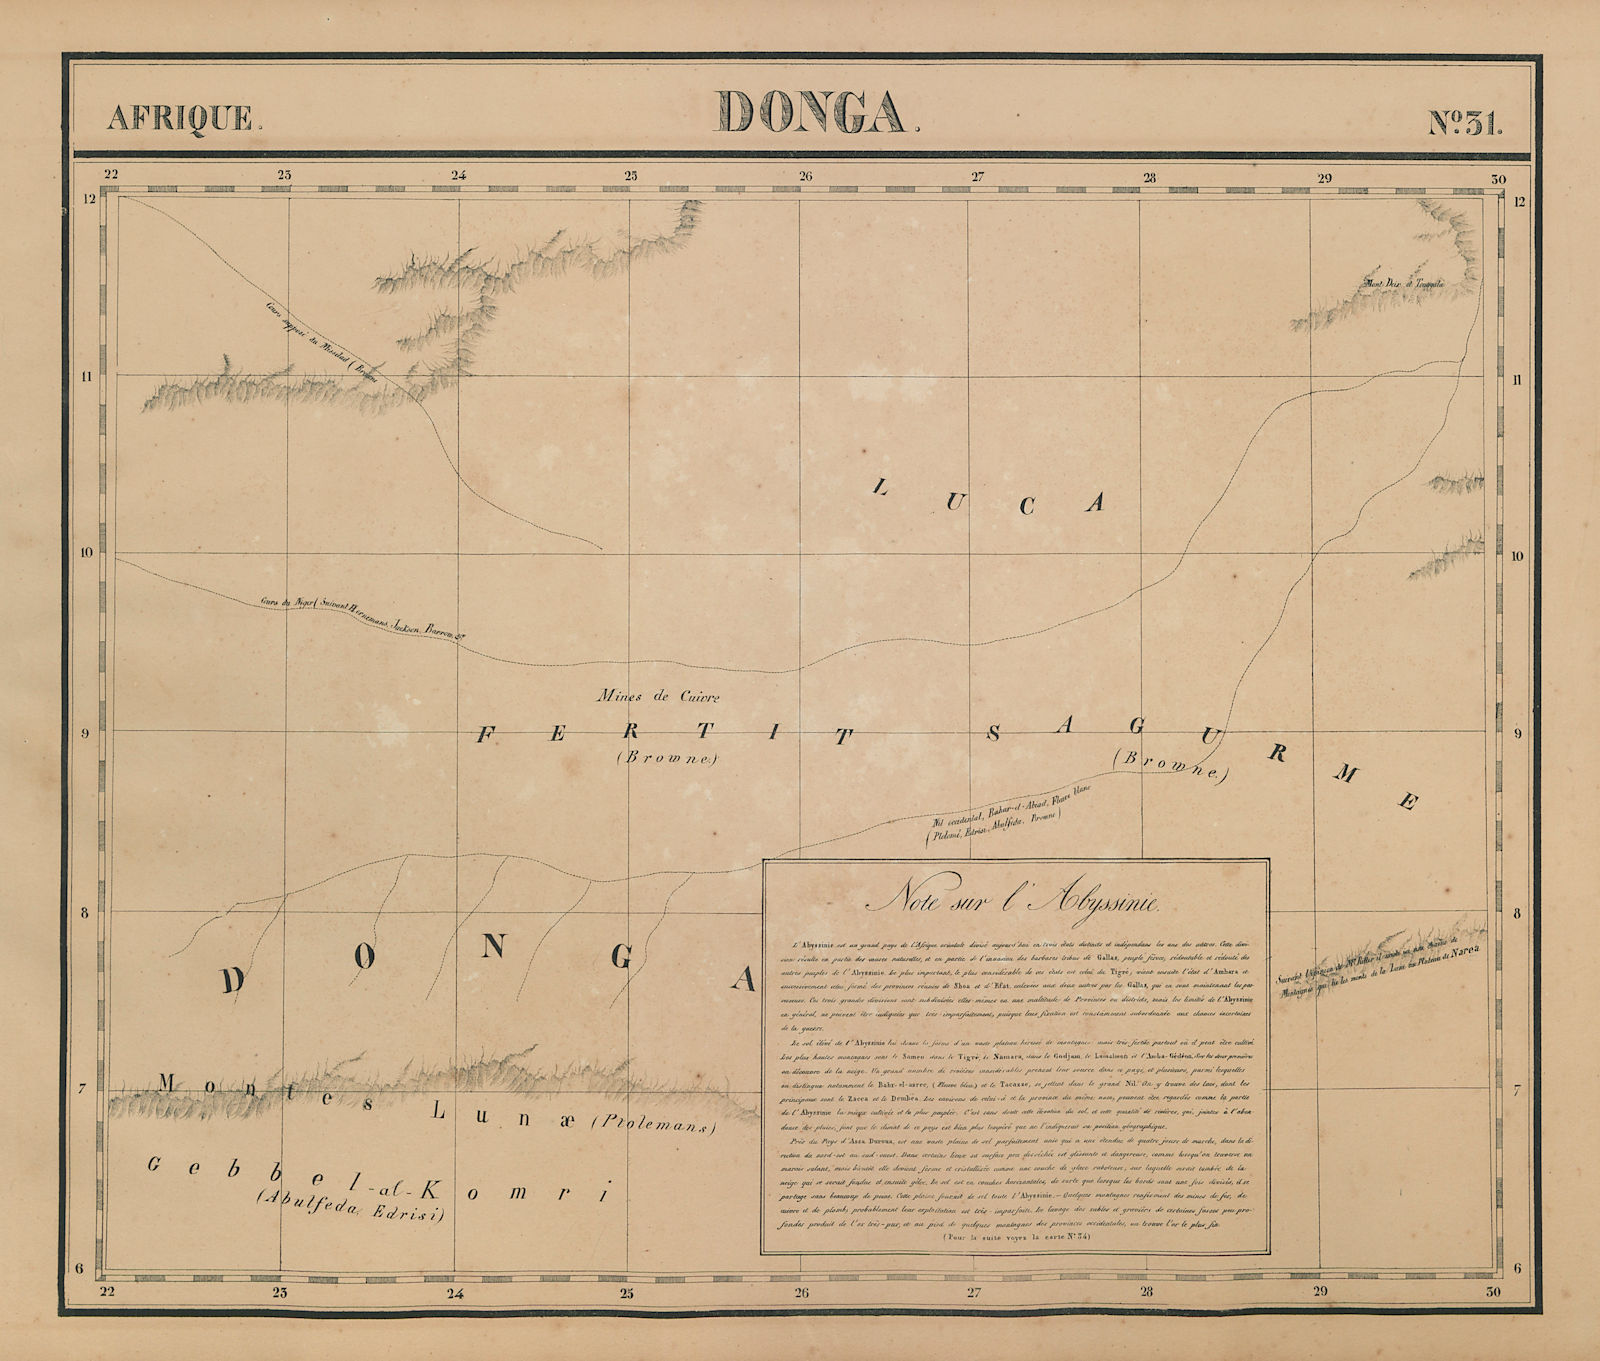 Associate Product Afrique. Donga #31. South / Southern Sudan. White Nile. VANDERMAELEN 1827 map